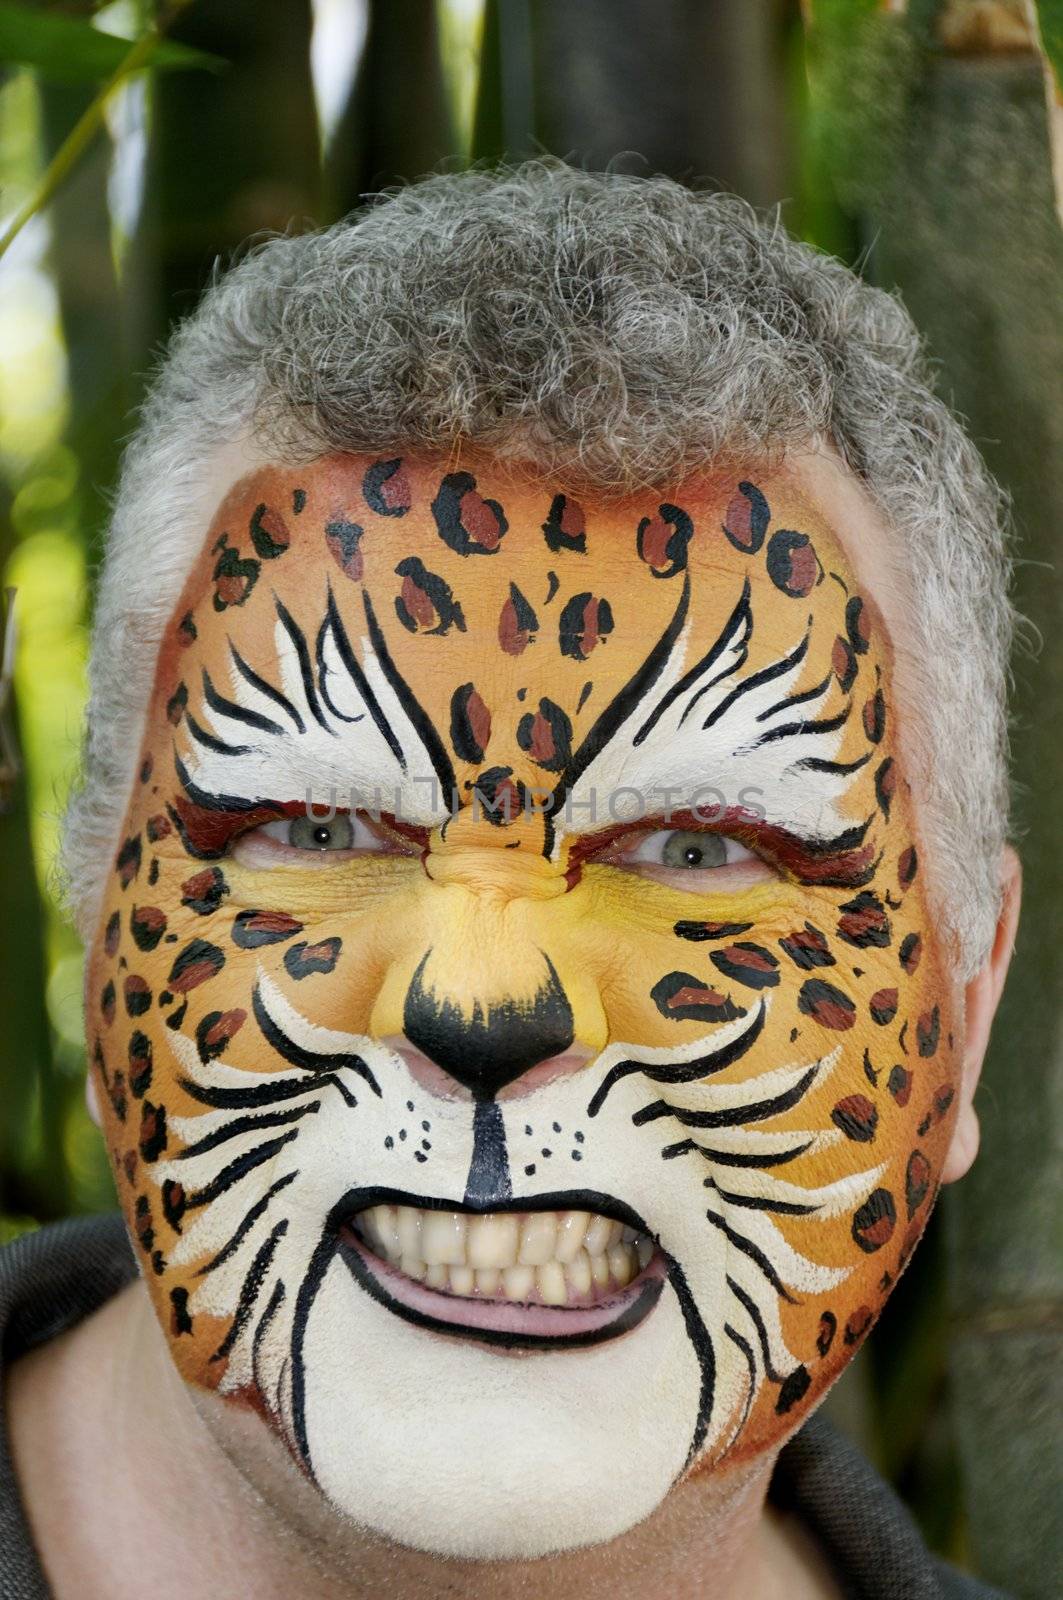 A man growling with a painted face.